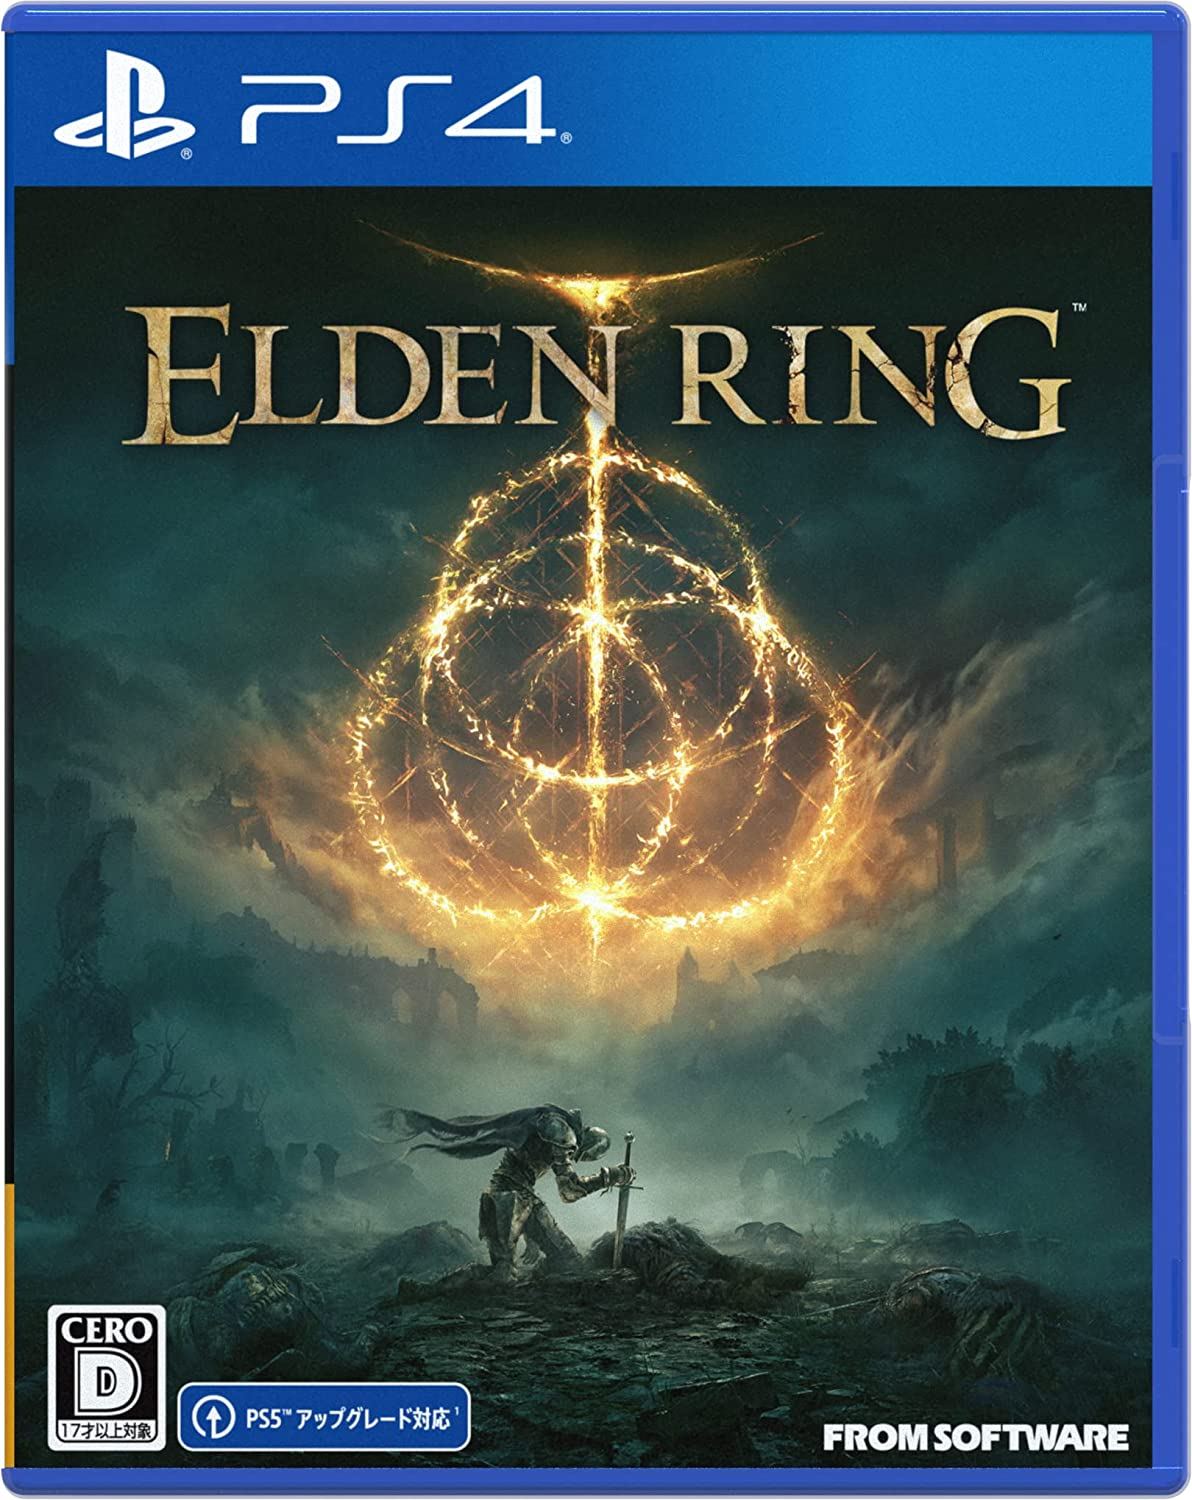 Elden Ring (Chinese) for PlayStation 4